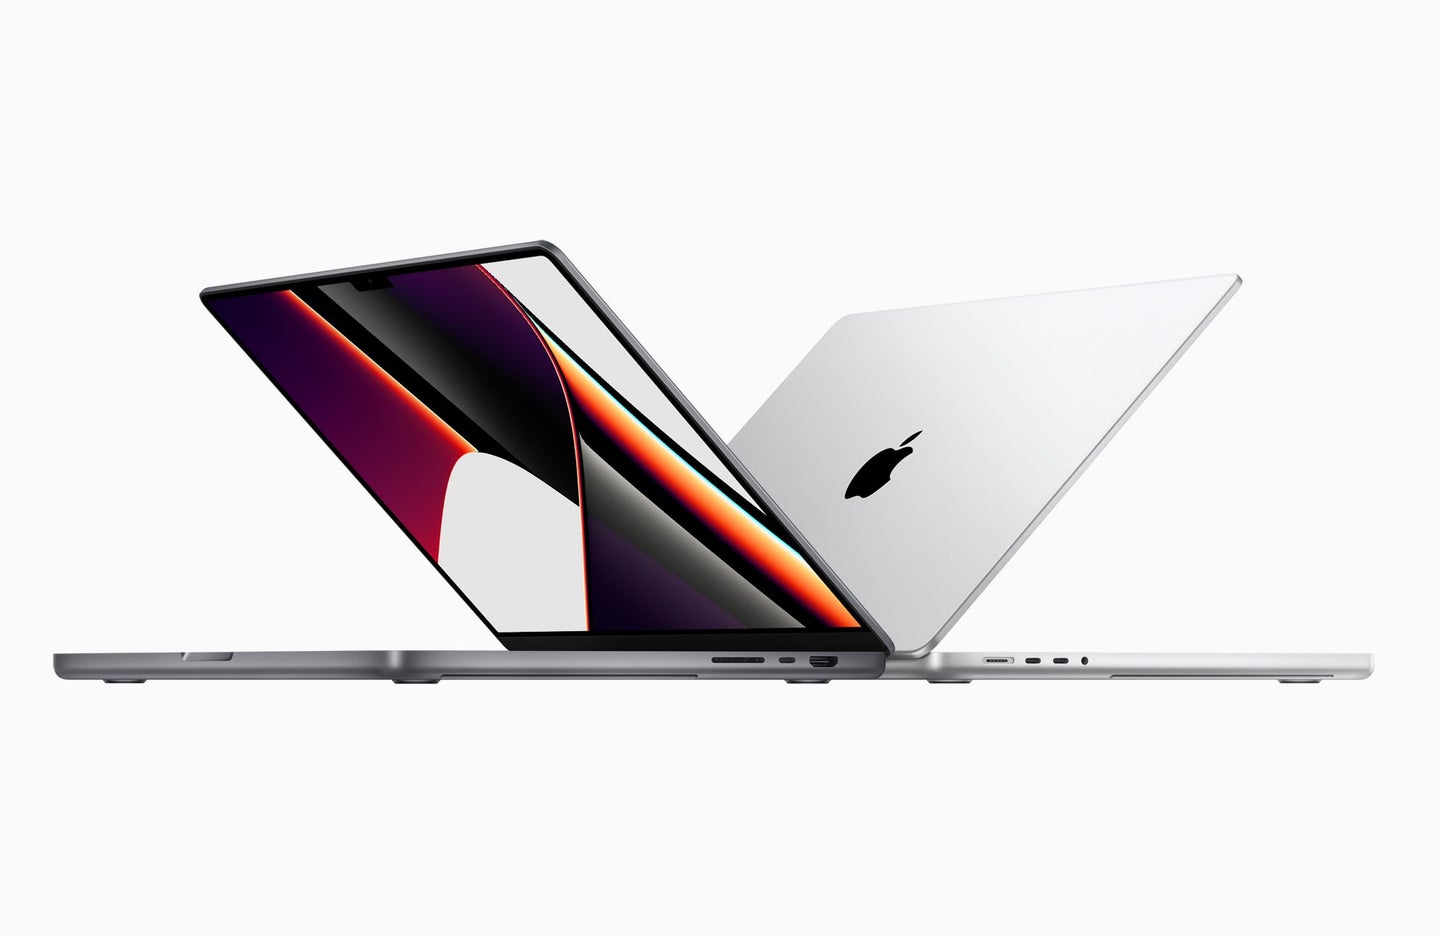 The new 2021 Apple Macbook Pro is here